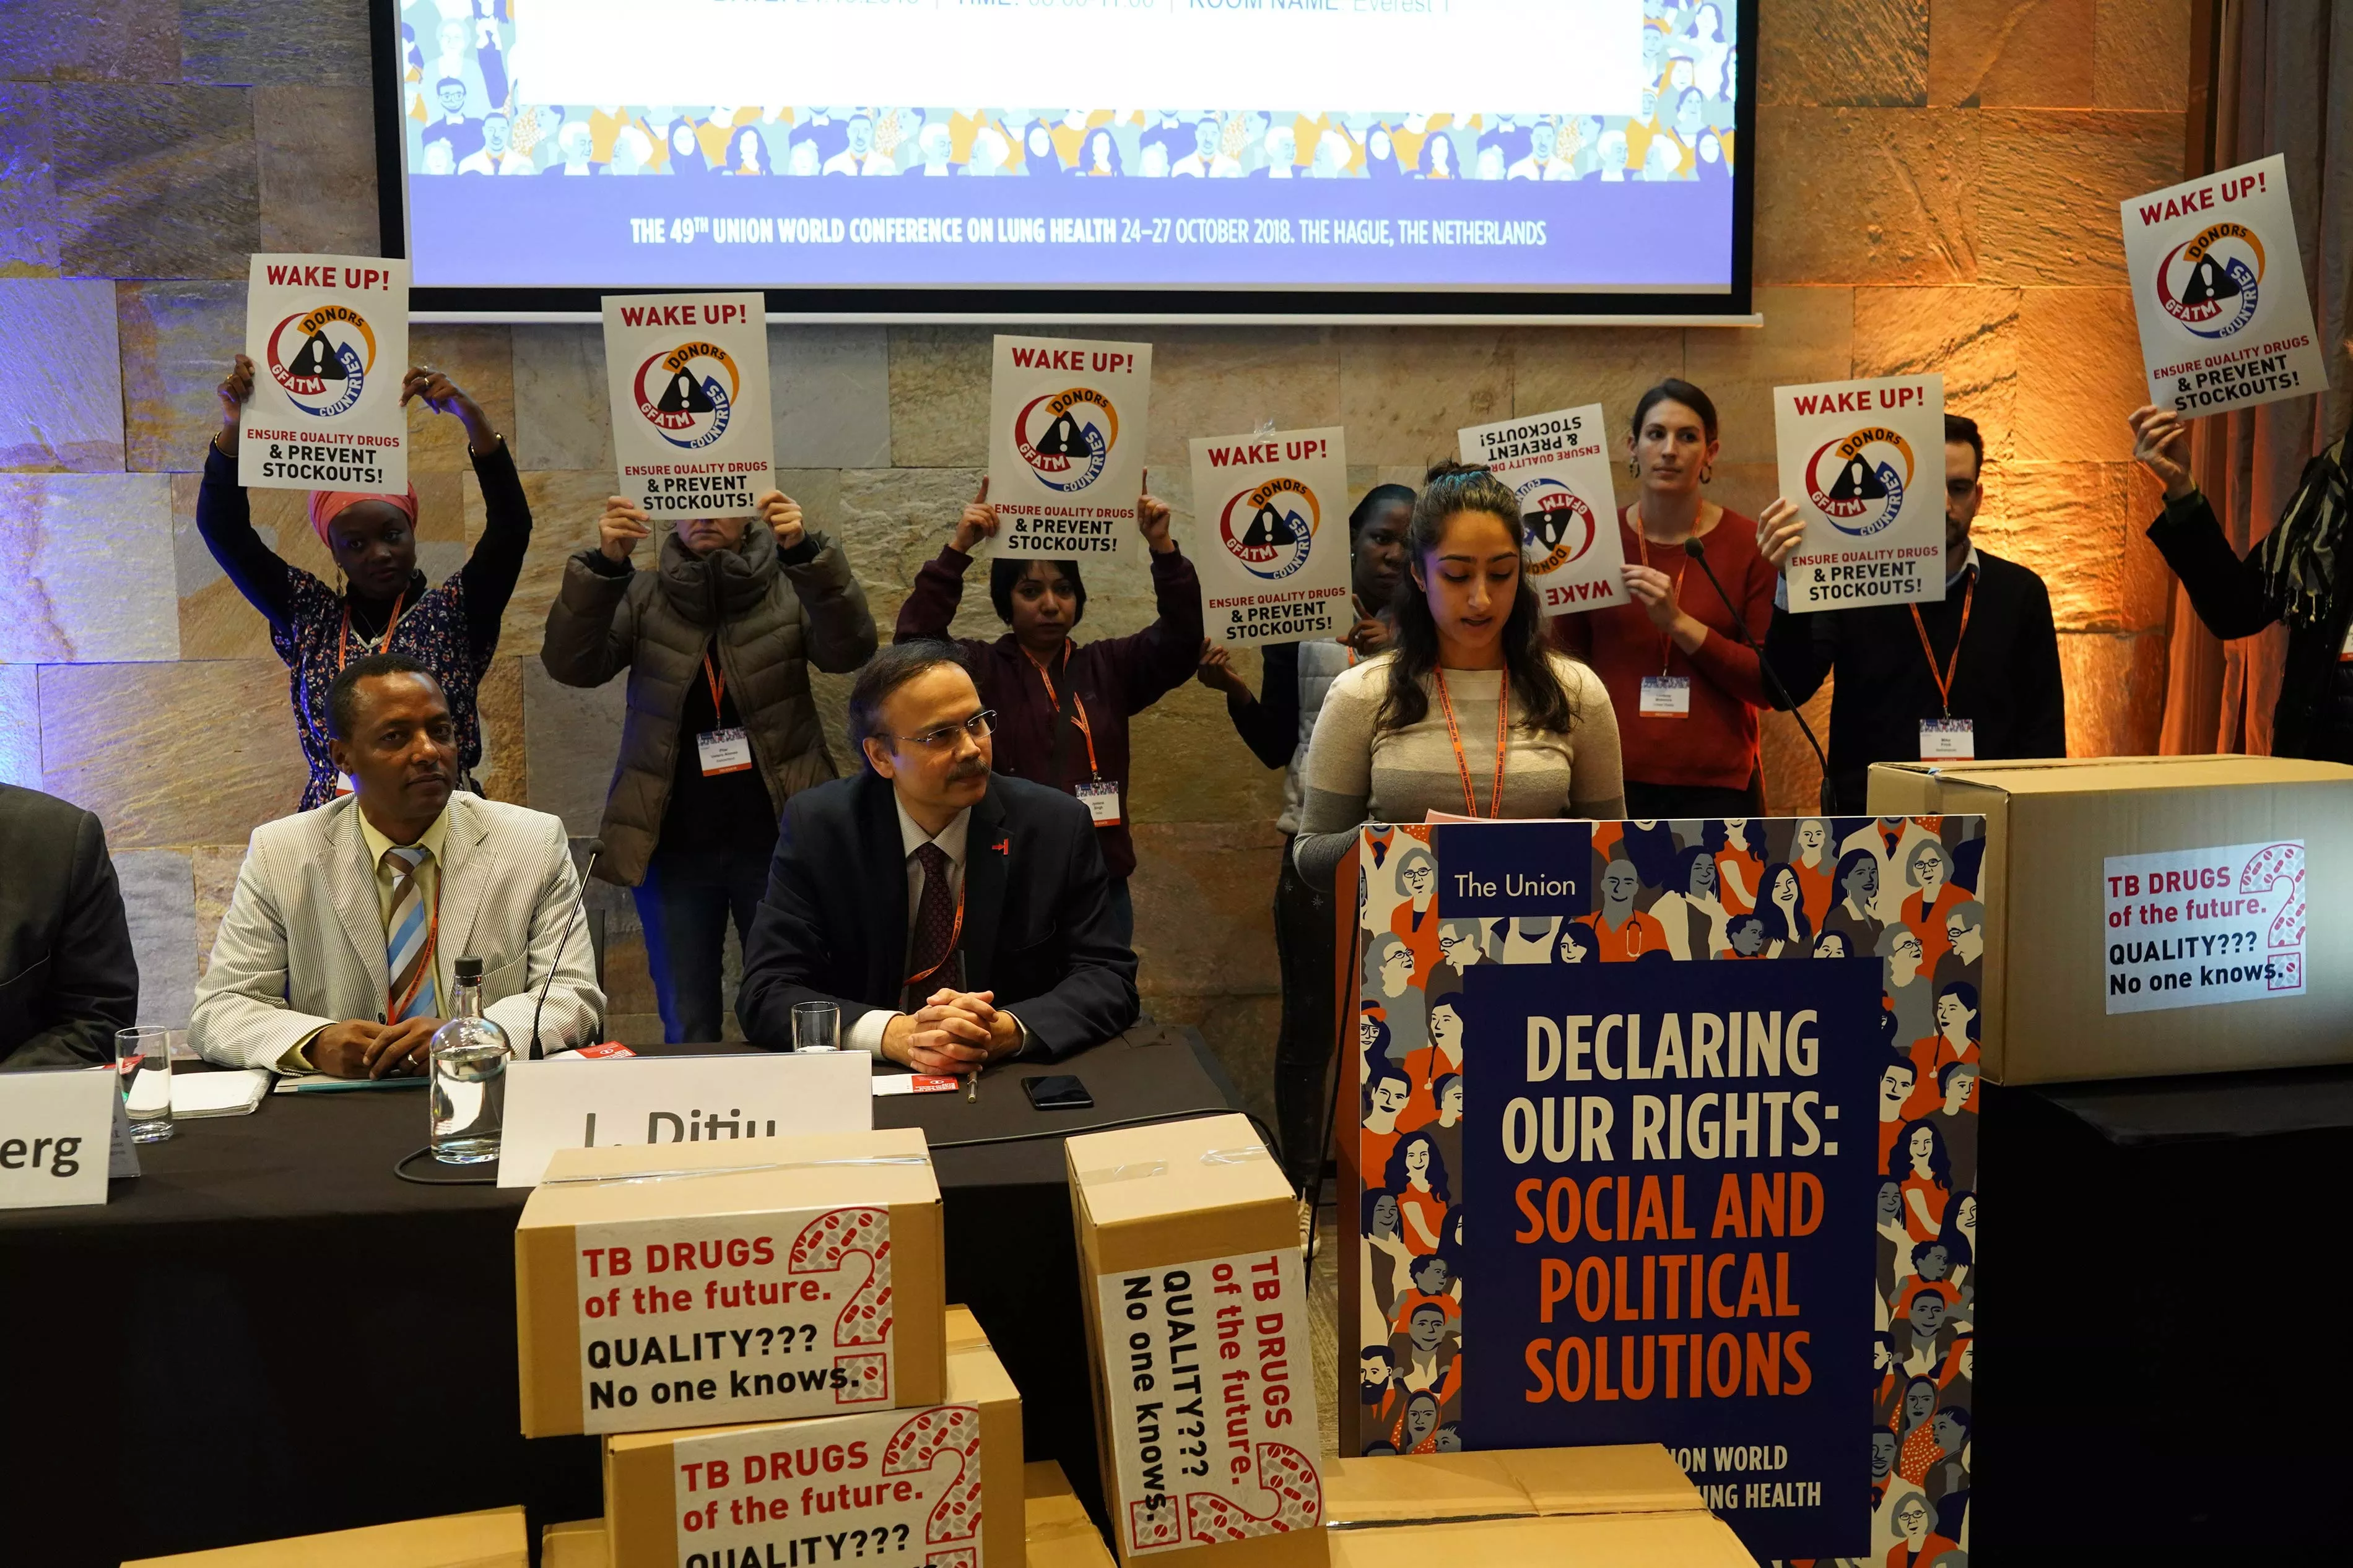 A coalition of civil society members and organisations, including MSF Access Campaign, carried out several advocacy related activities, including protests, at The 49th Union World Conference on Lung Health in The Hague, The Netherlands 24-27 October 2018.  Photos are from a protest on 24 October 2018 where activists brought attention to the drug procurement challenges countries face when they shift from Global Fund support to domestic procurement and co-financing issues.